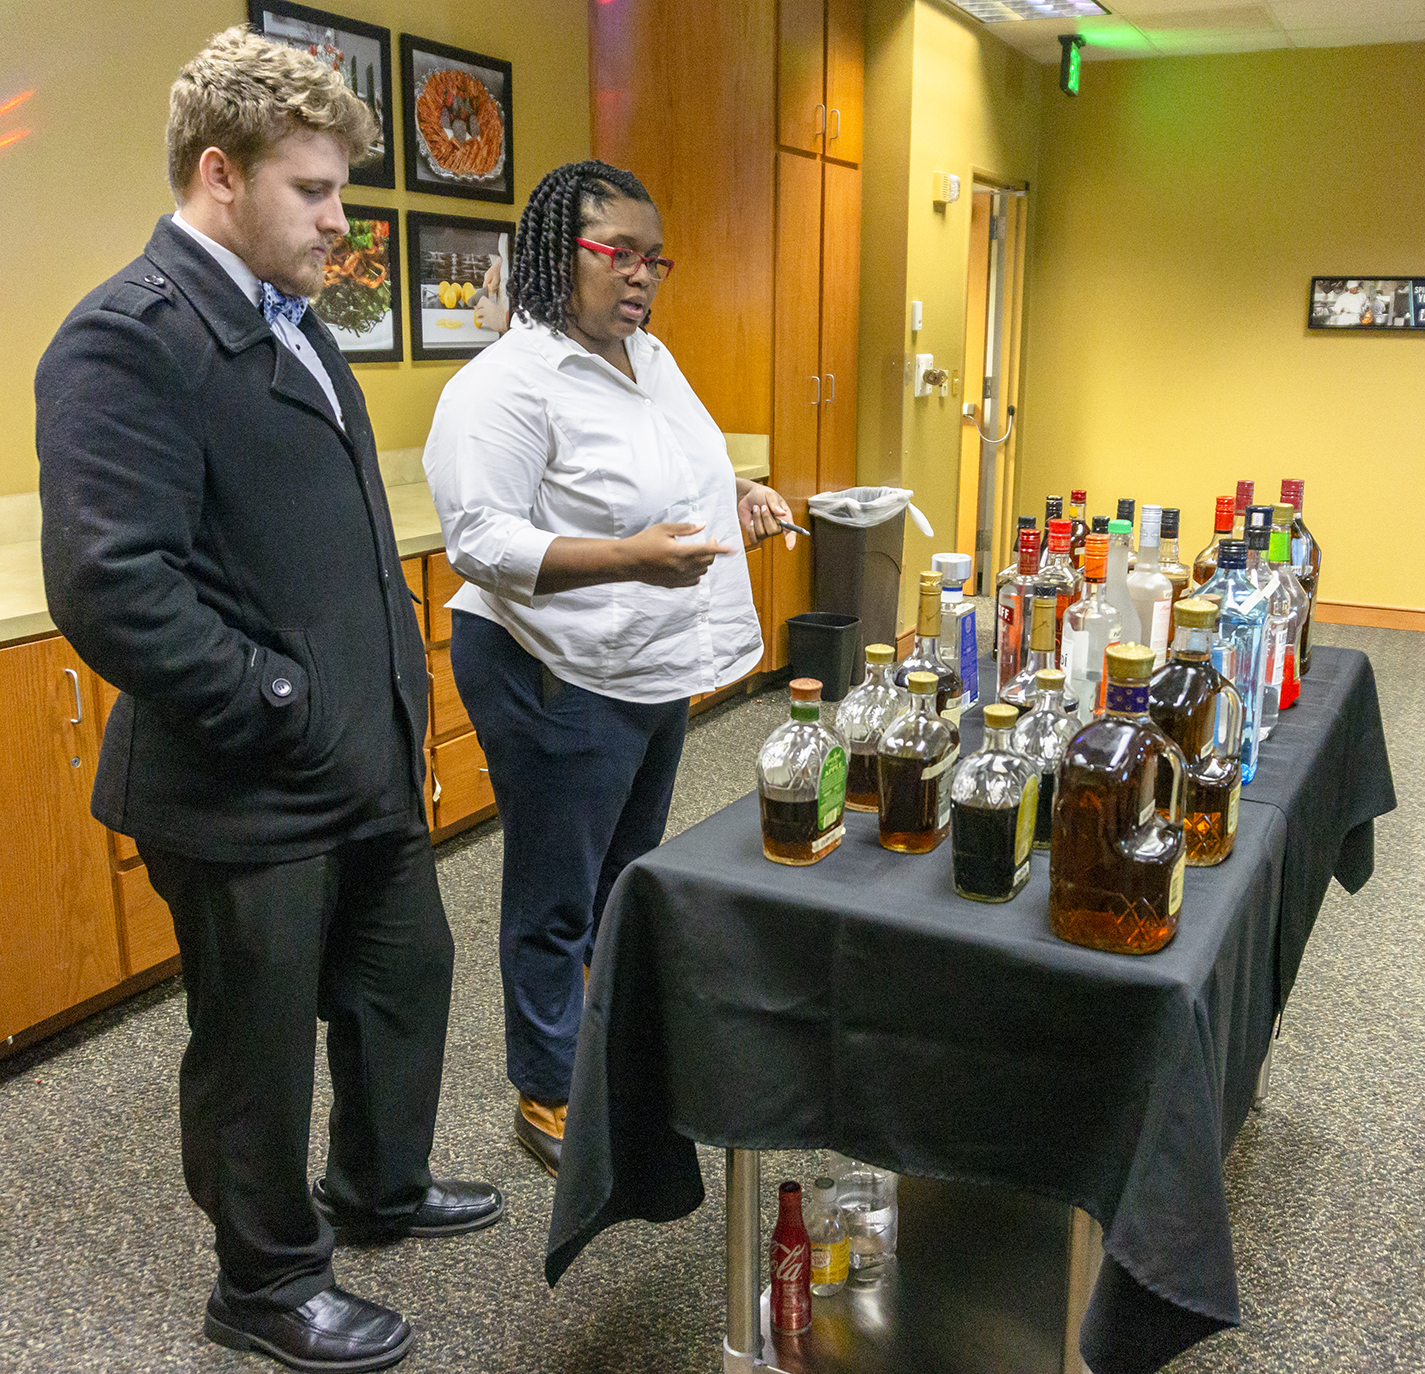 NE and SE student Sam Bailey and SE student Kemy Acosta peruse liquor bottles filled with colored water to inspire them for an assignment to create a unique concoction.